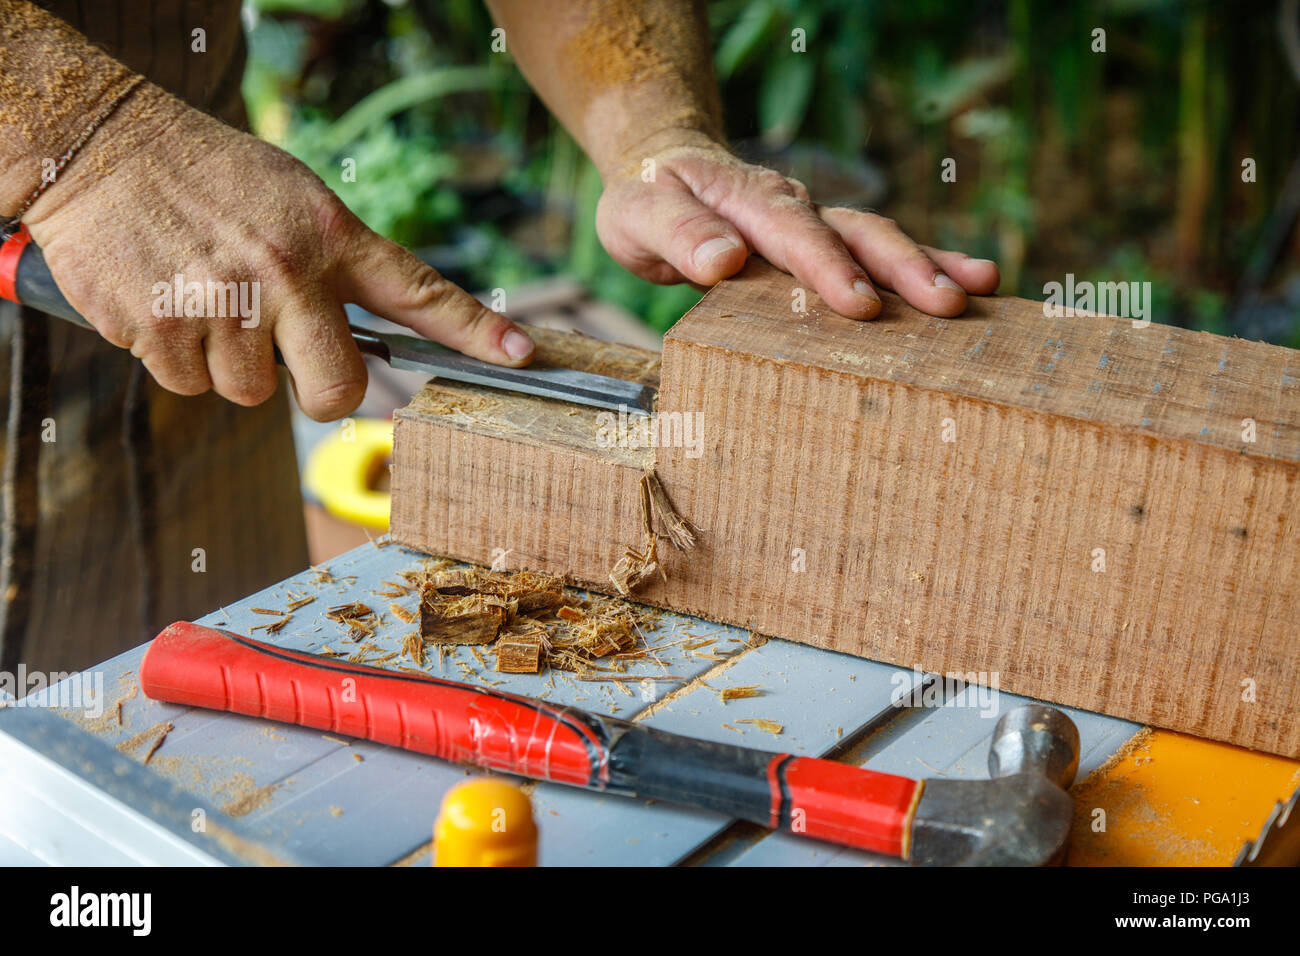 Man in apron chiseling wood with chisel on a table saw. Hammer laying on the table. Hands covered in saw dust. Carpentry tools, concept of wood work. Stock Photo